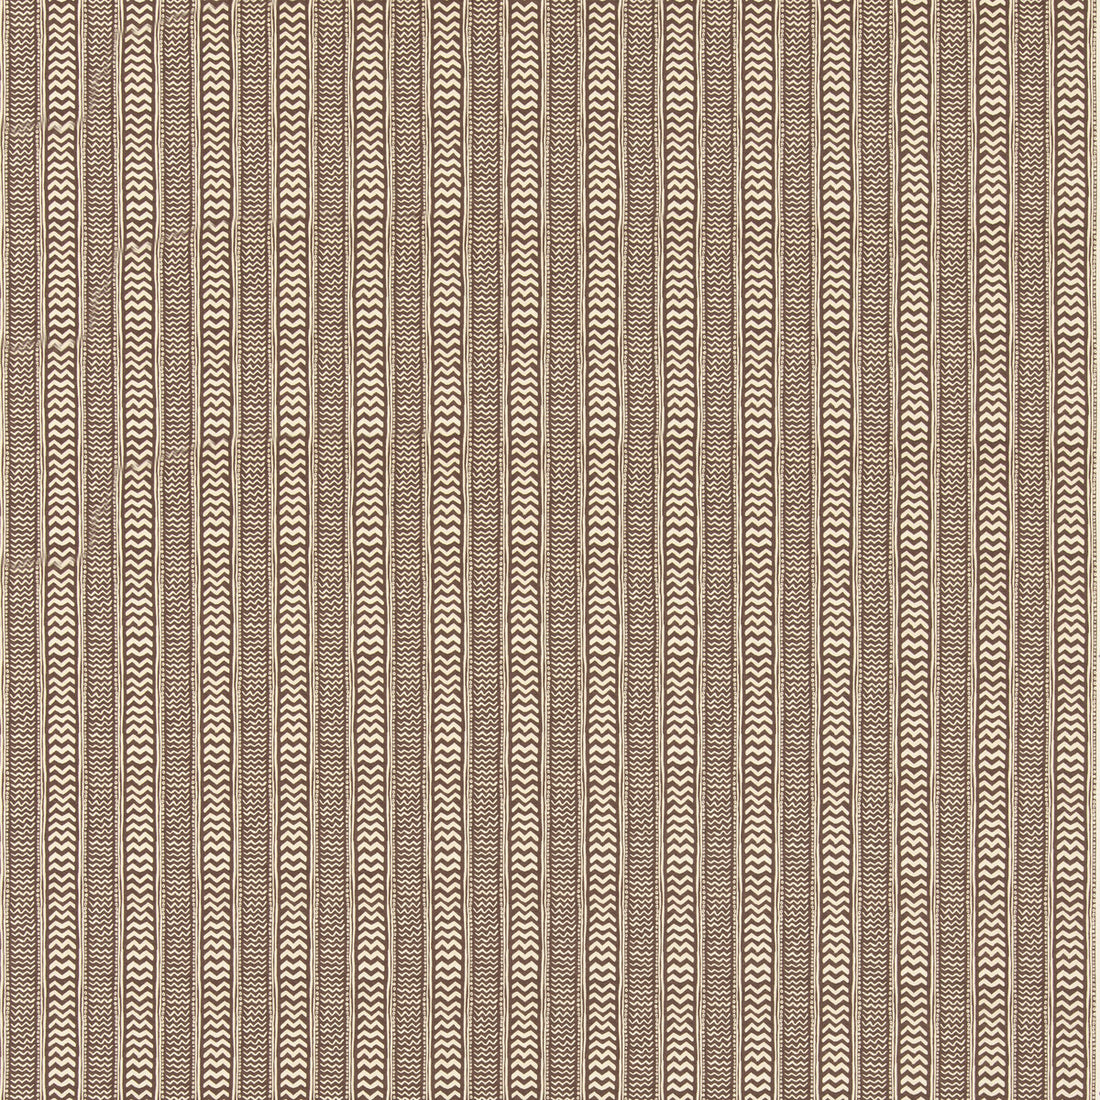 Tweak fabric in cocoa color - pattern BP11051.290.0 - by G P &amp; J Baker in the X Kit Kemp Prints And Embroideries collection